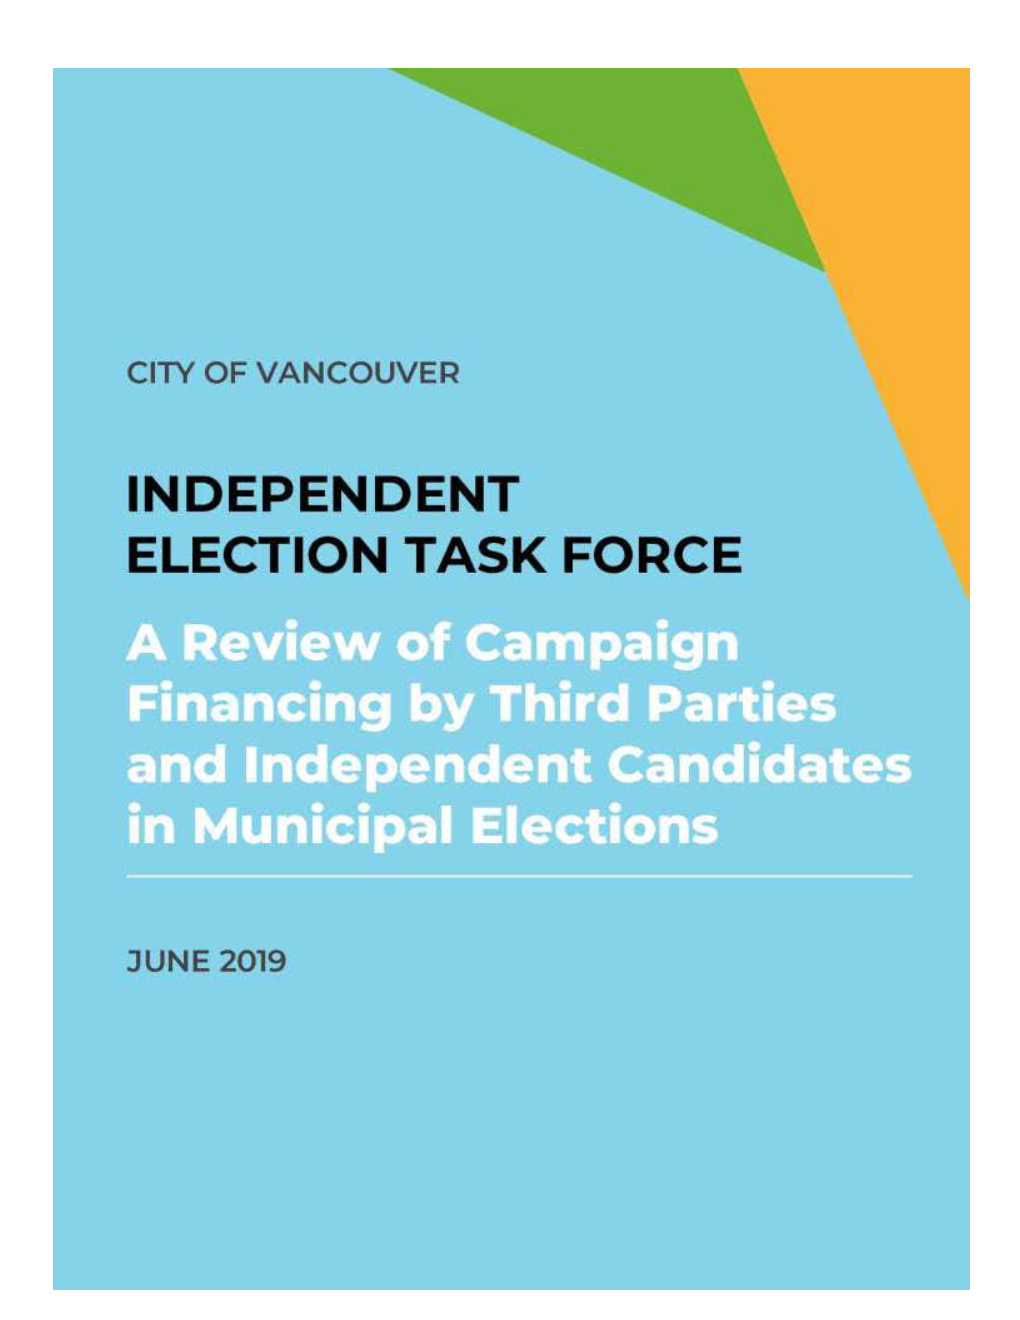 Independent Election Task Force Report on Campaign Financing